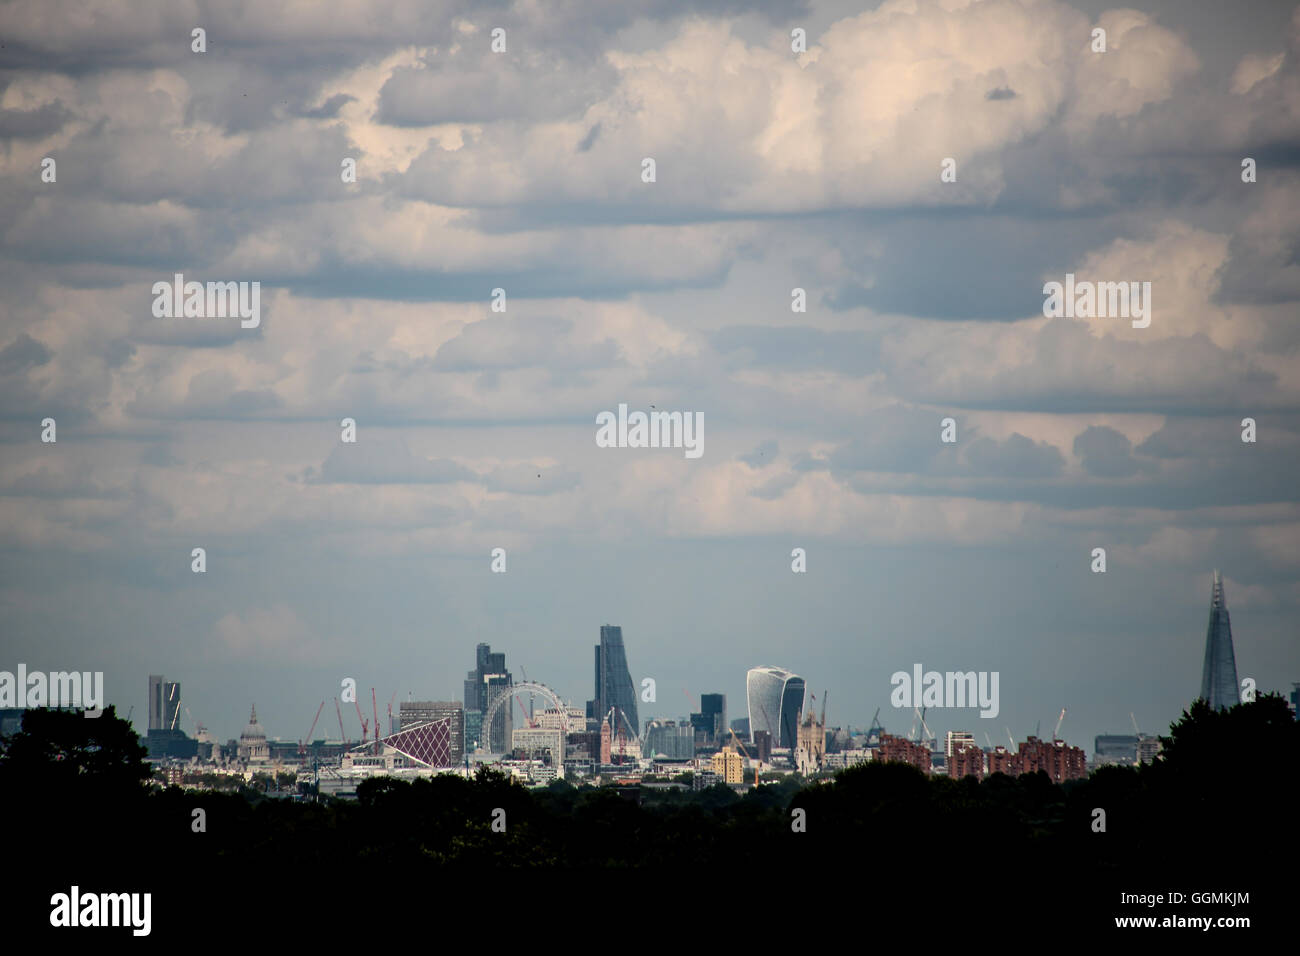 A skyline view of the City of London from Richmond Park in London Stock Photo